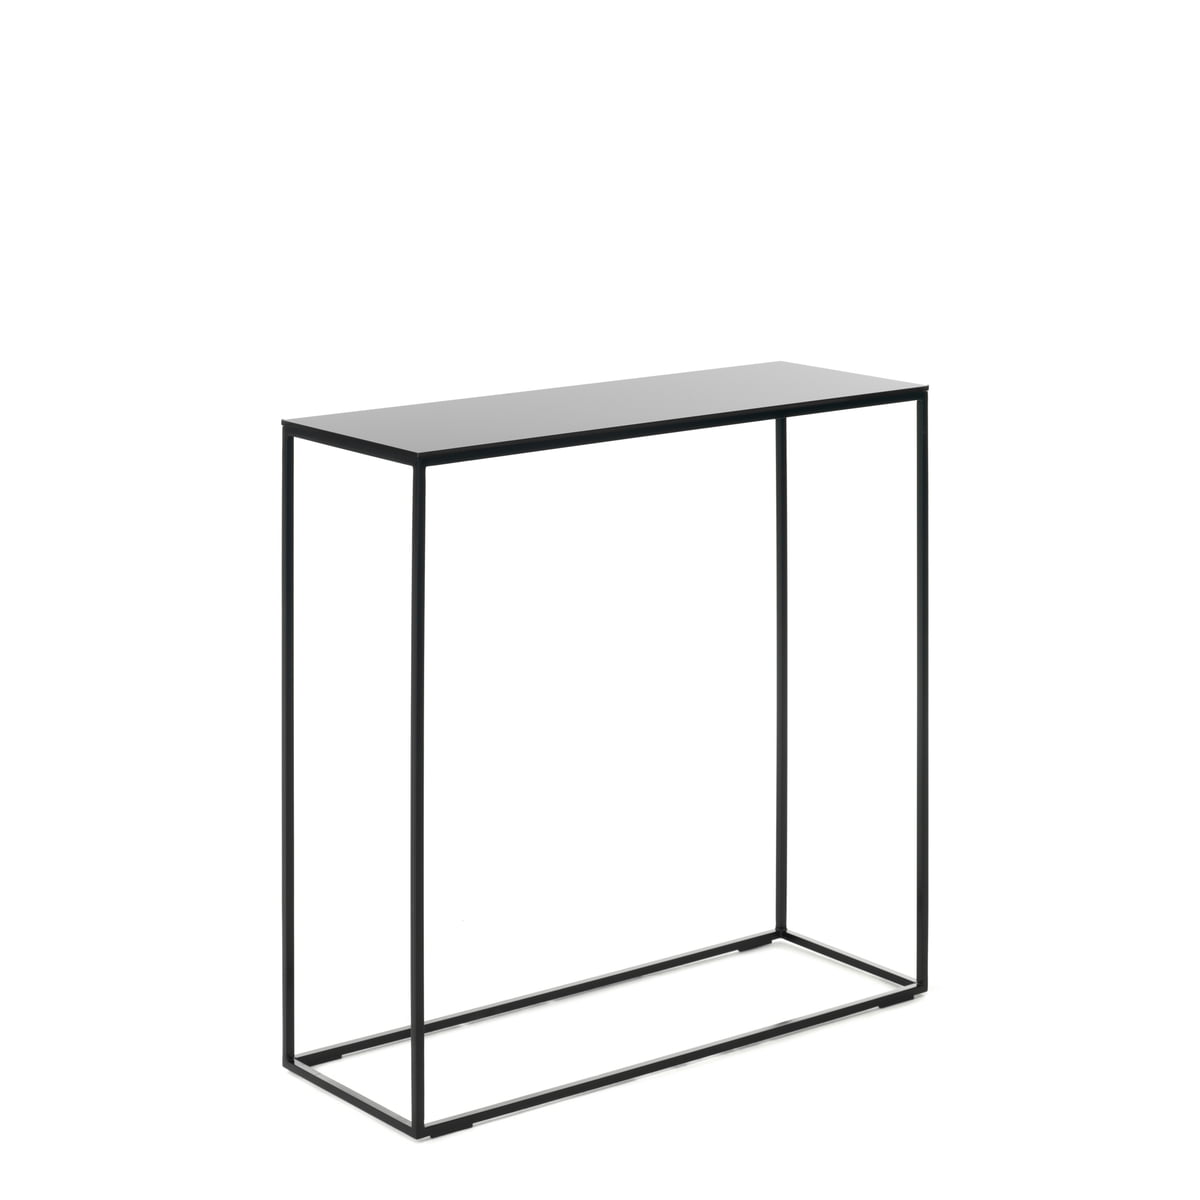 buy console table